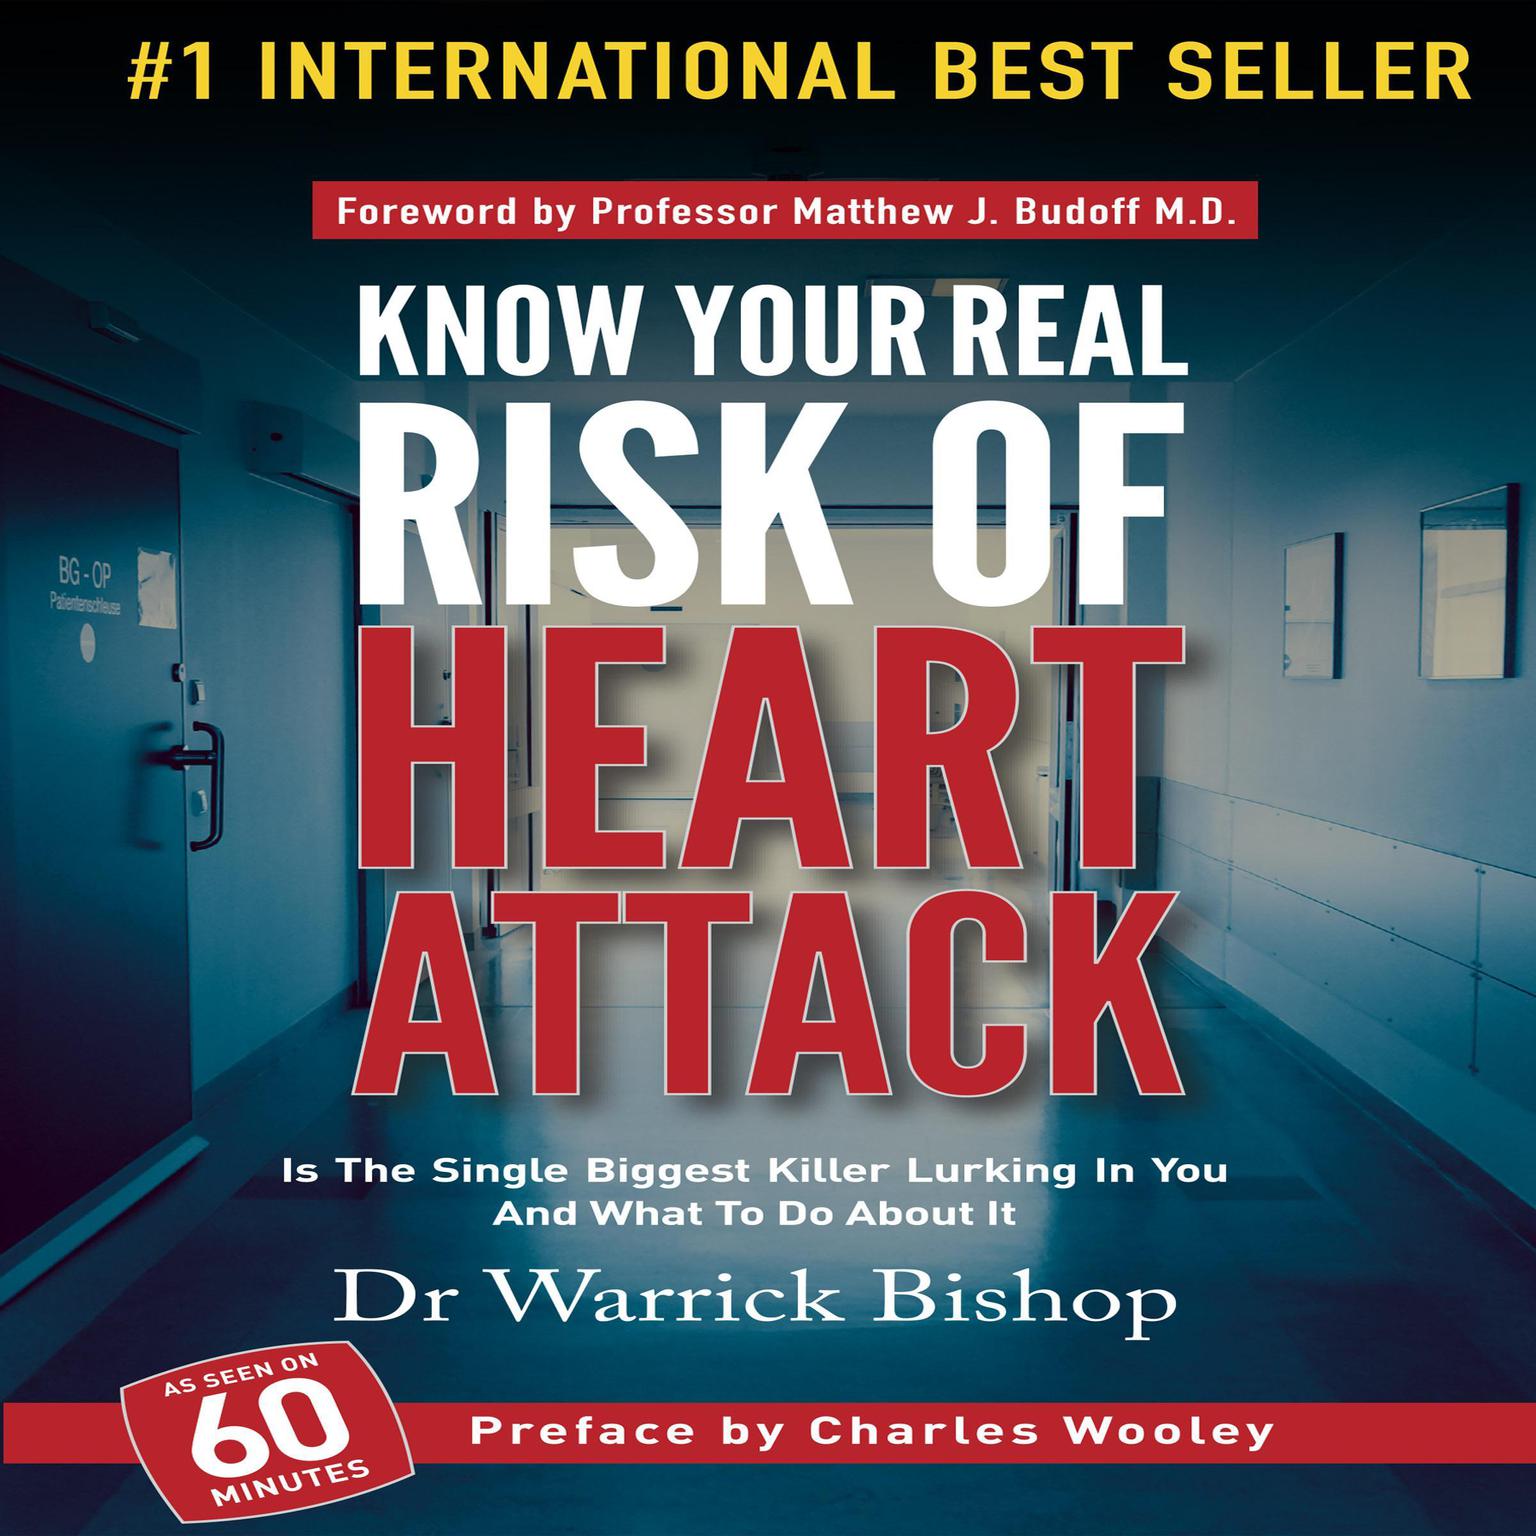 Know Your Real Risk of Heart Attack: Is The Single Biggest Killer Lurking In You And What To Do About It: Is The Single Biggest Killer Lurking In You And What To Do About It Audiobook, by Warrick Bishop